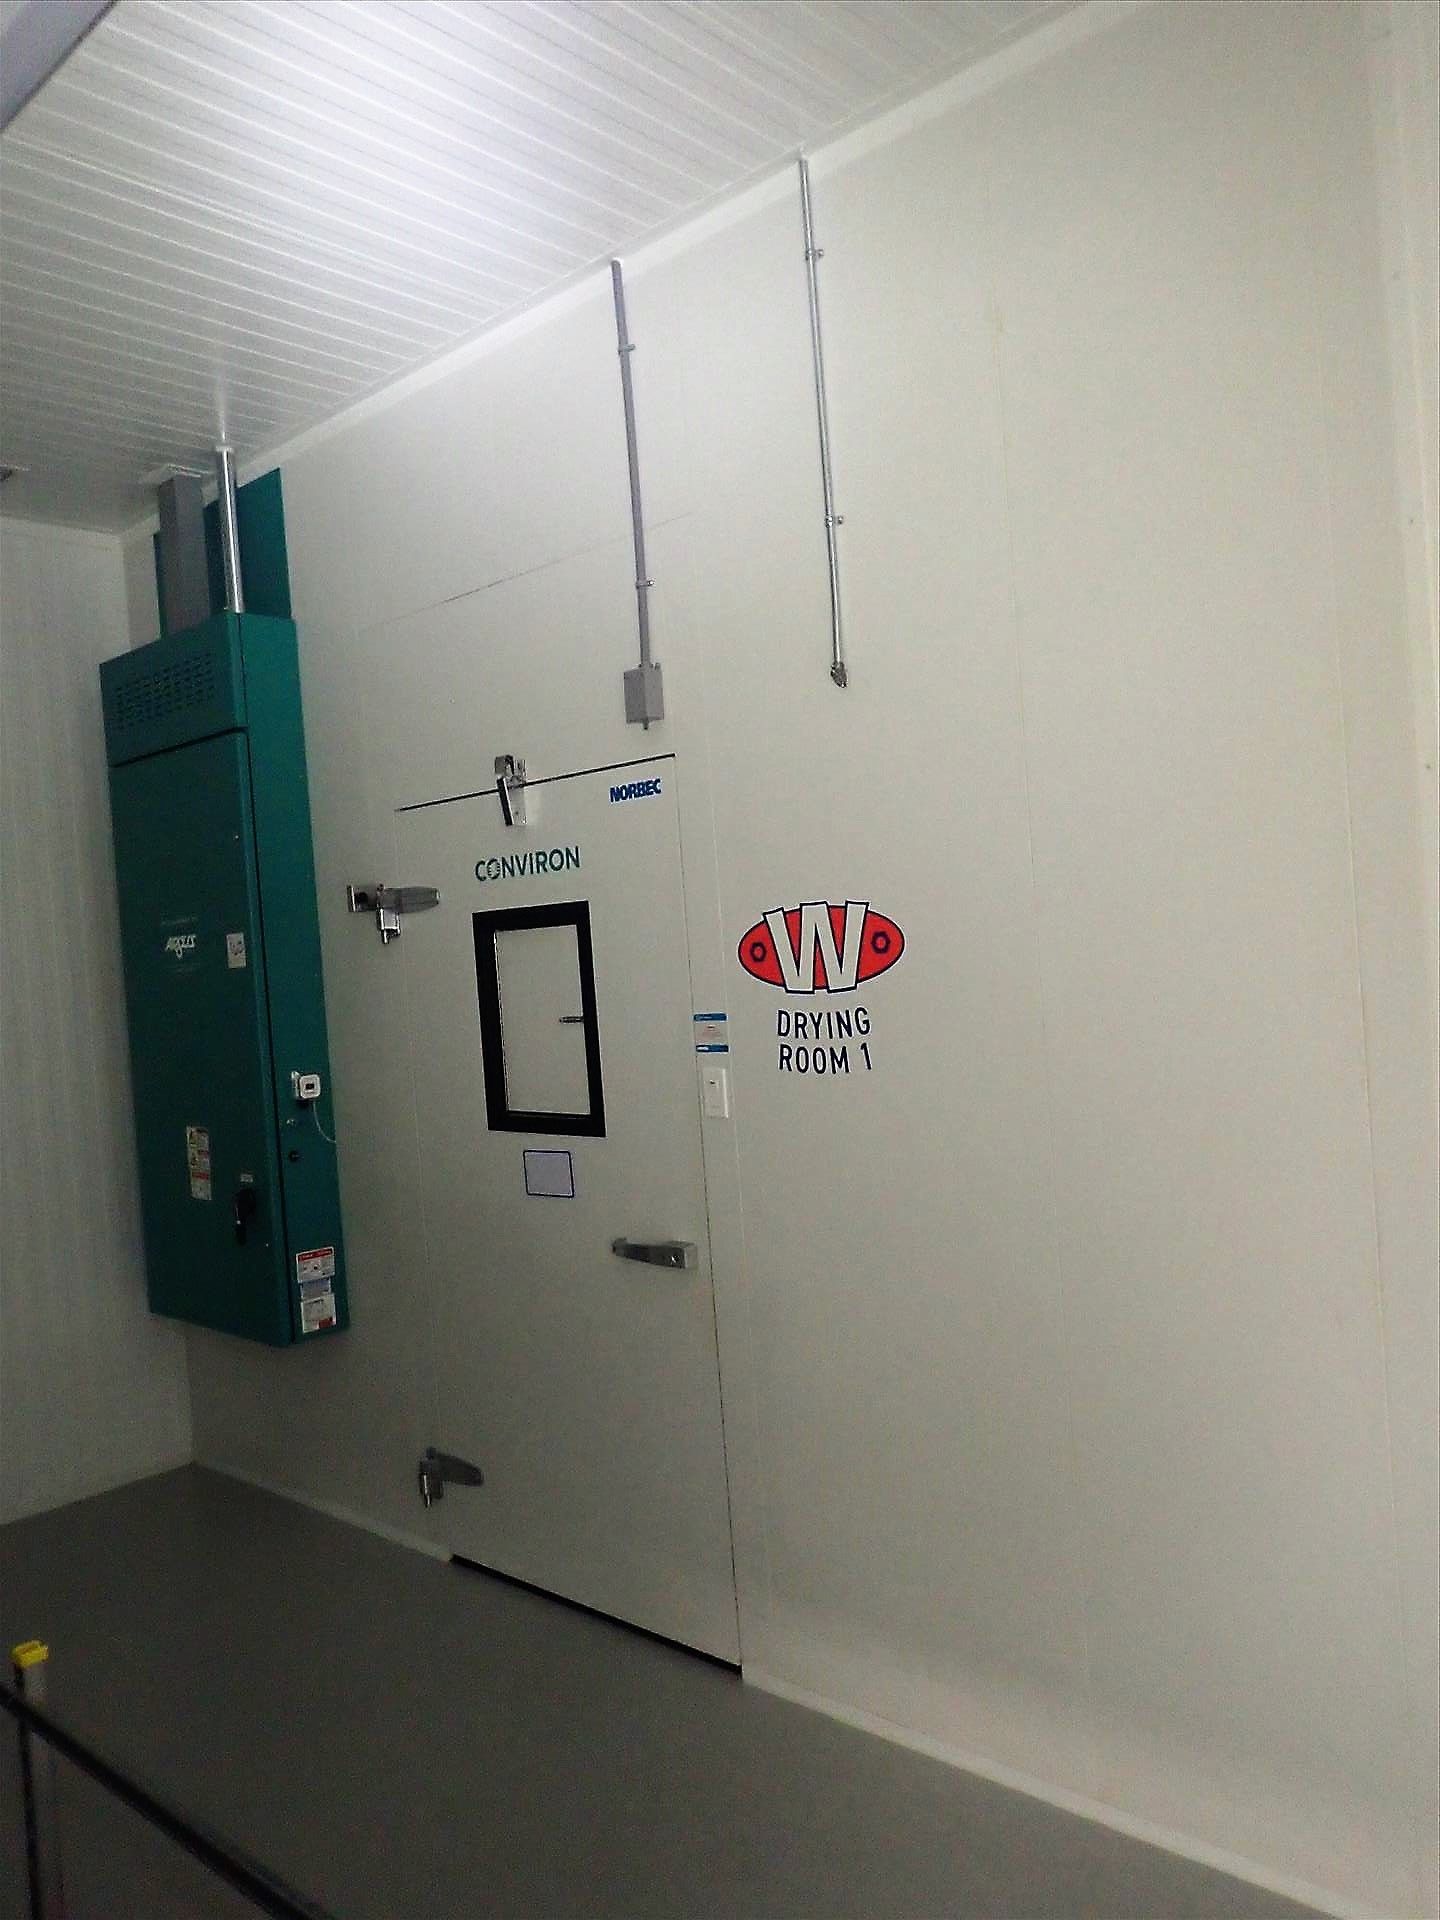 Conviron drying room, 50 ft. x 12 ft., ducting, perforated wall panels w/ Argus control panel,